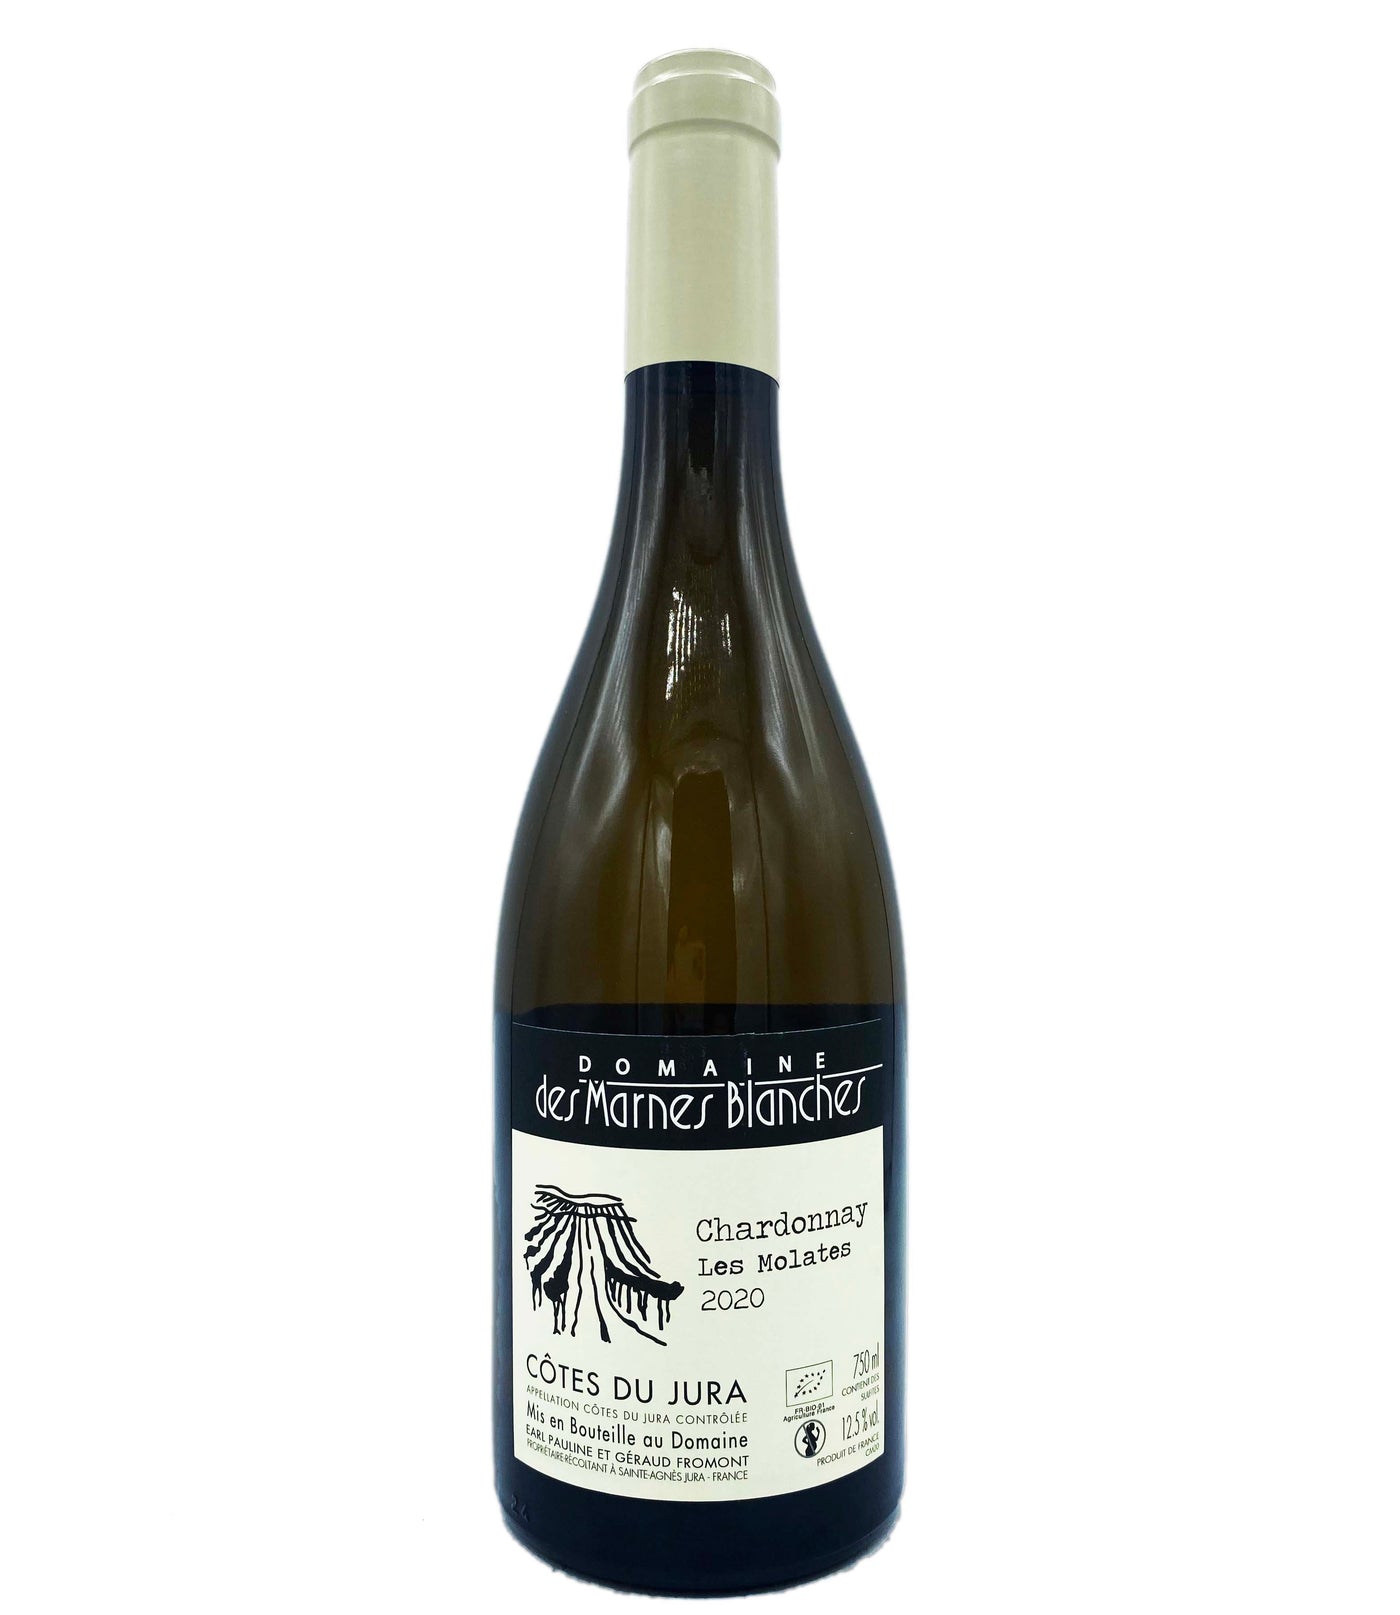 Domaine des Marnes Blanches Chardonnay Molates 2021